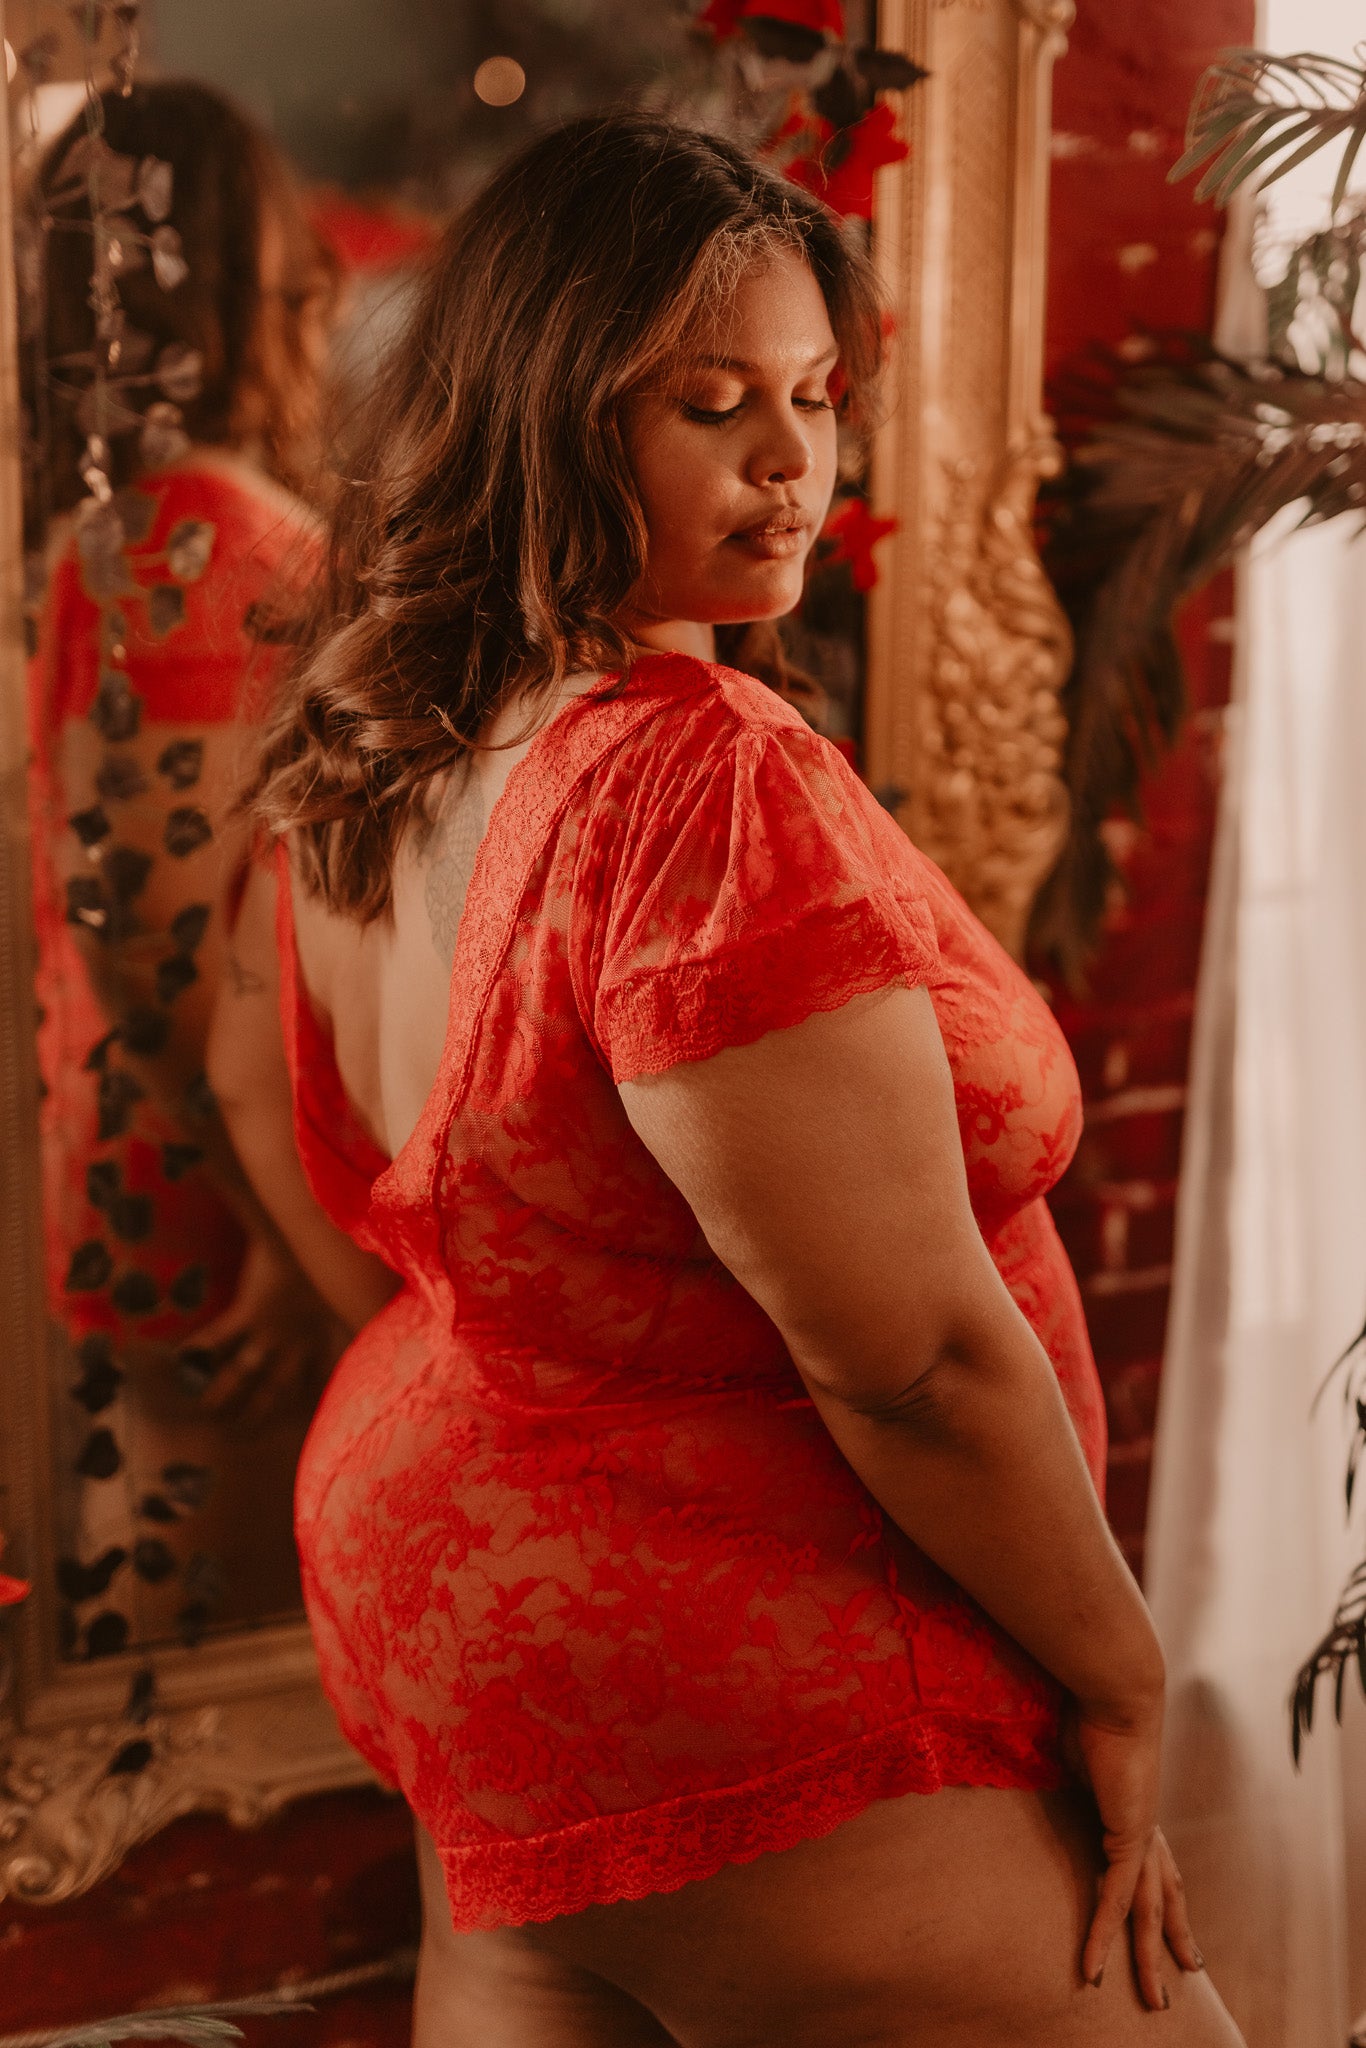 Tammy Plus Size Red Lace Teddy